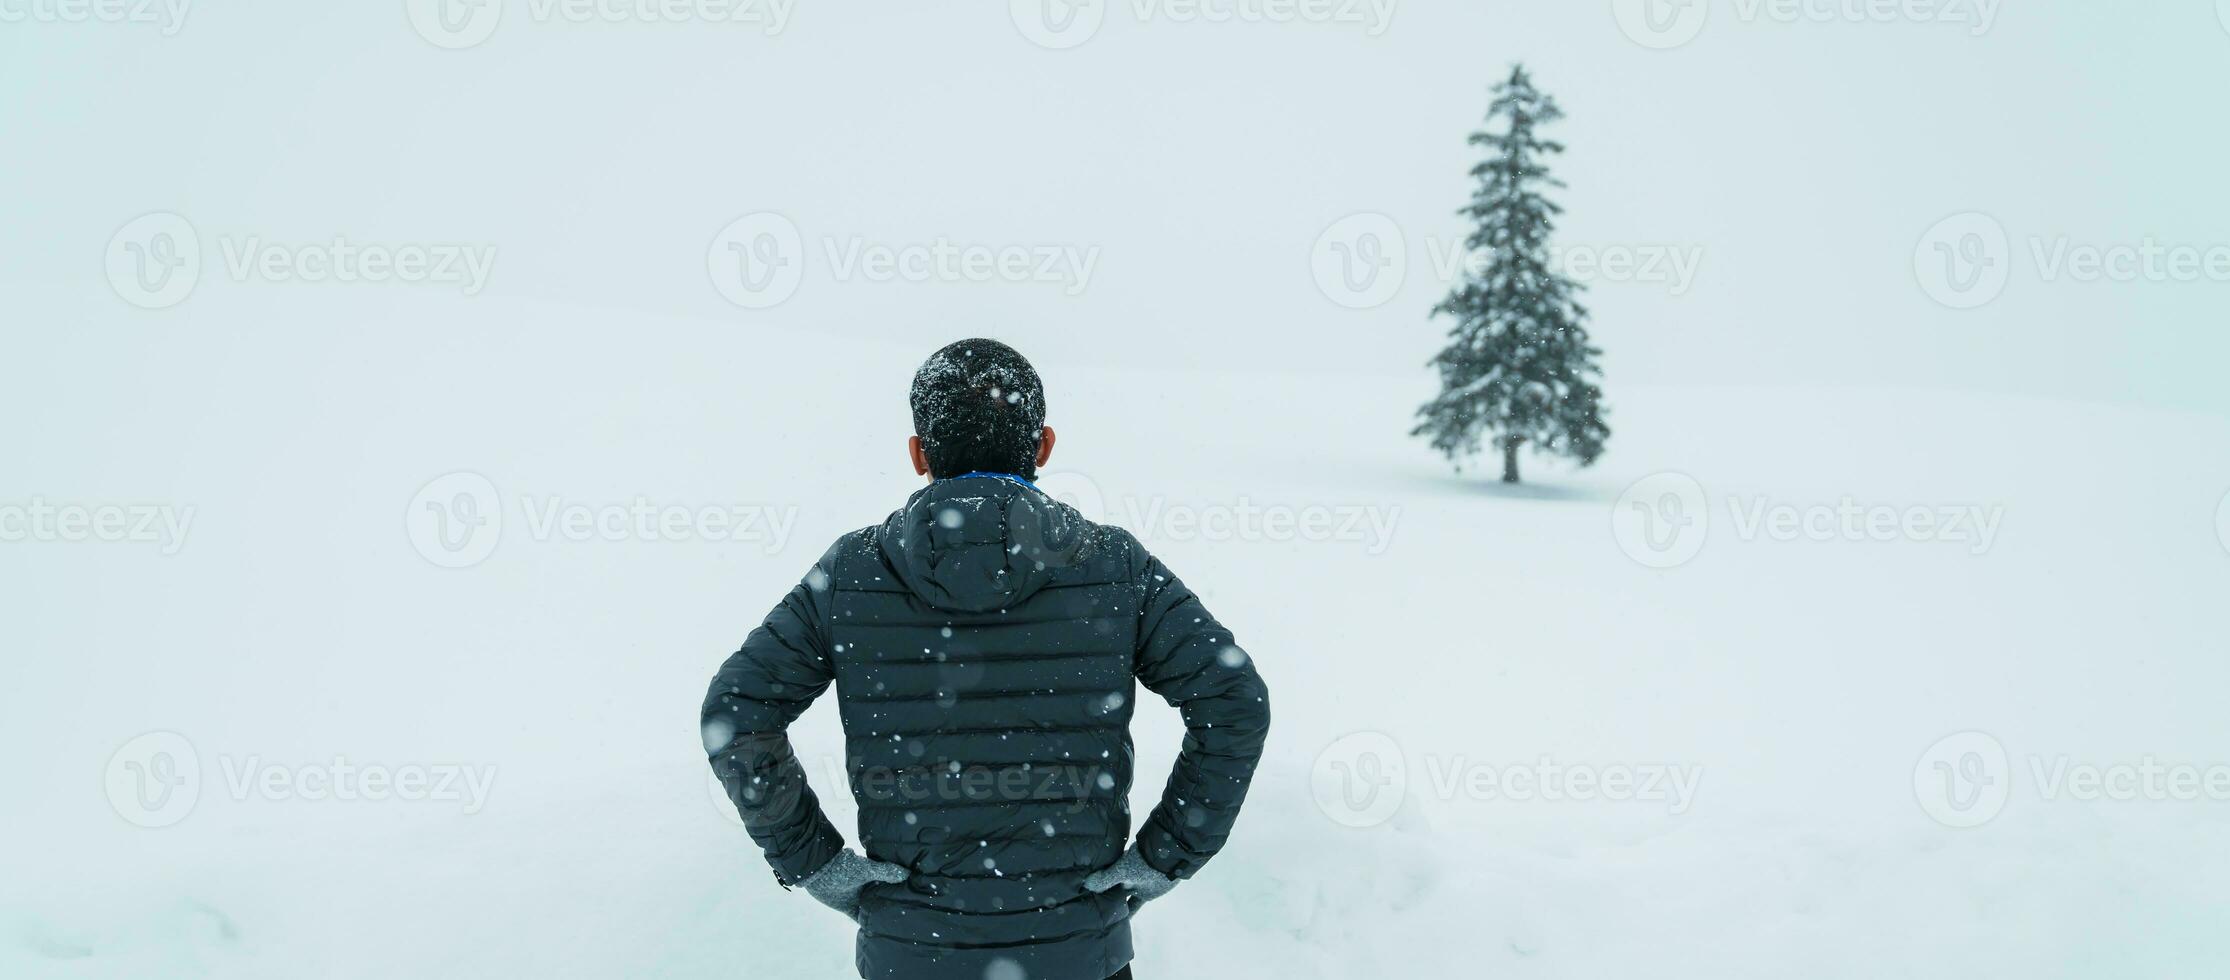 man tourist Visiting in Biei, Traveler in Sweater sightseeing Christmas tree with Snow in winter season. landmark and popular for attractions in Hokkaido, Japan. Travel and Vacation concept photo